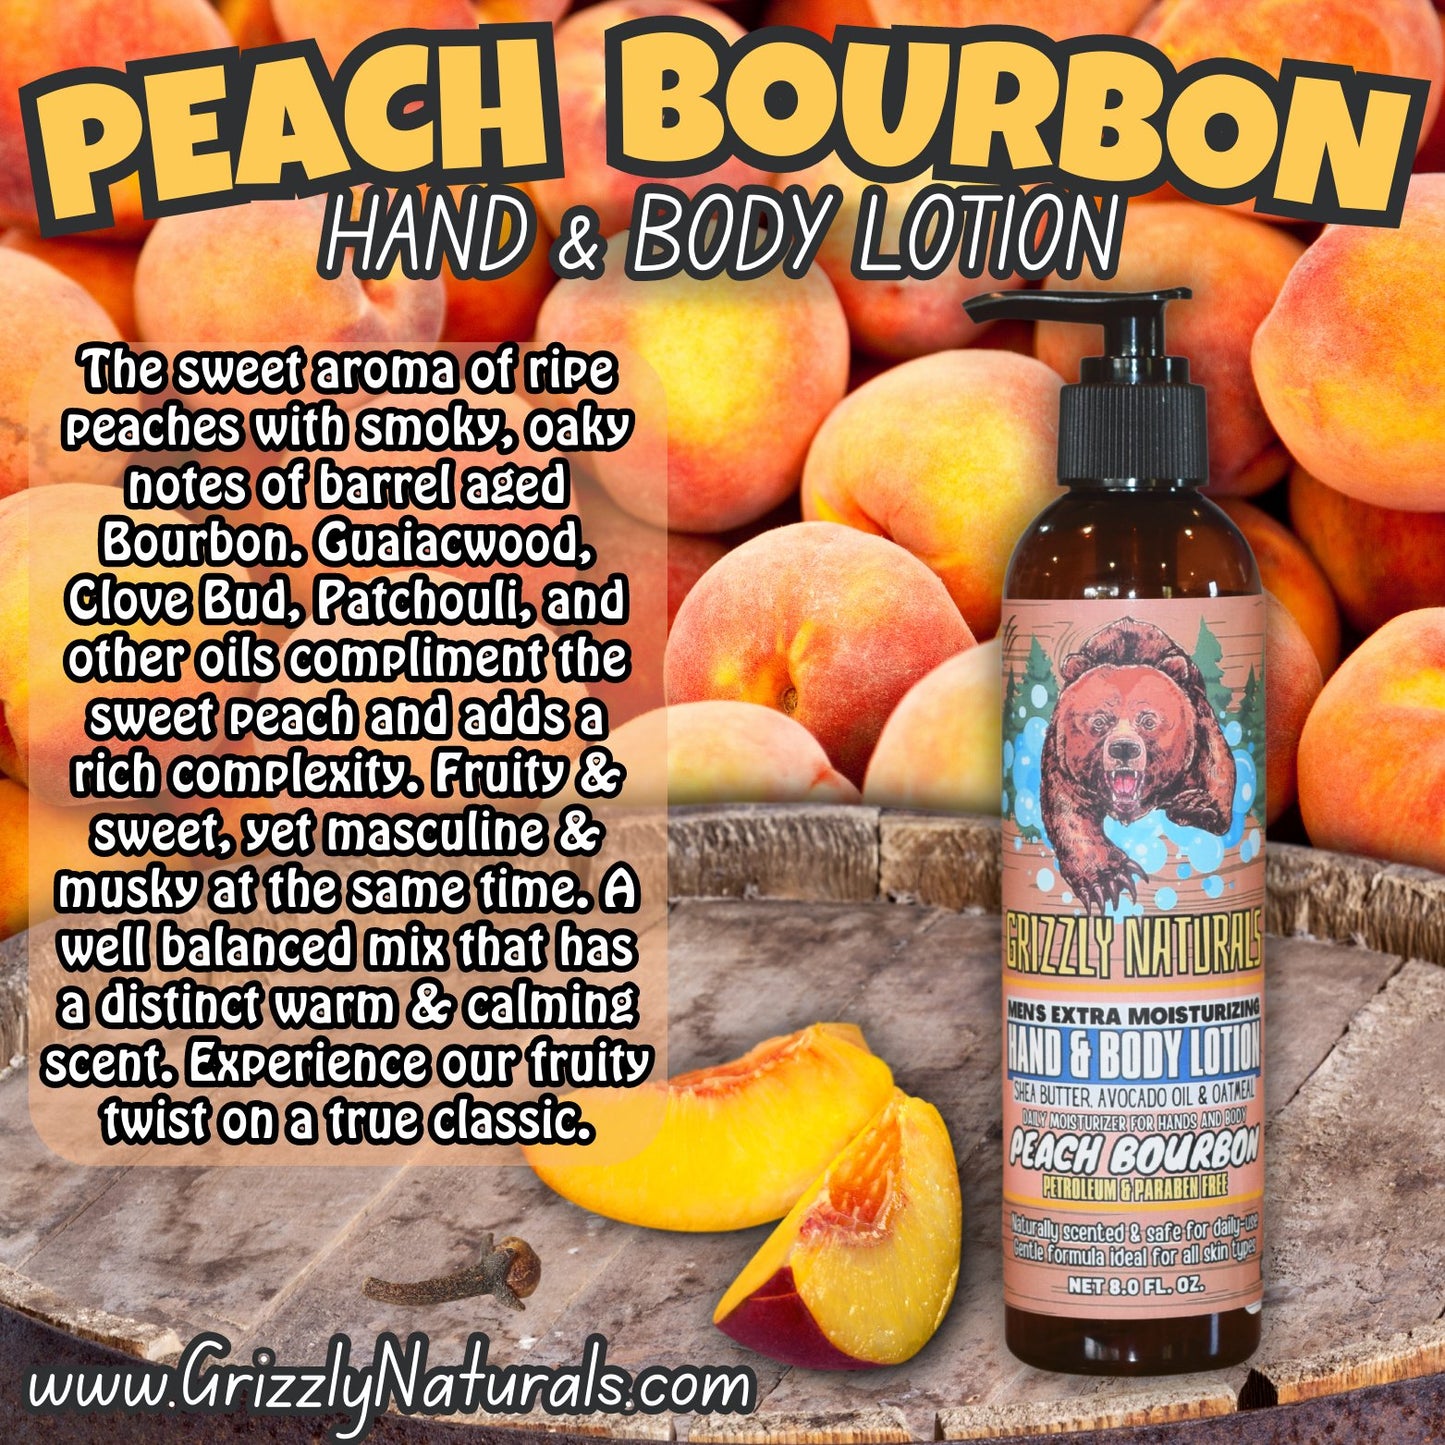 Peach Bourbon Hand / Body Lotion - Grizzly Naturals Soap Company